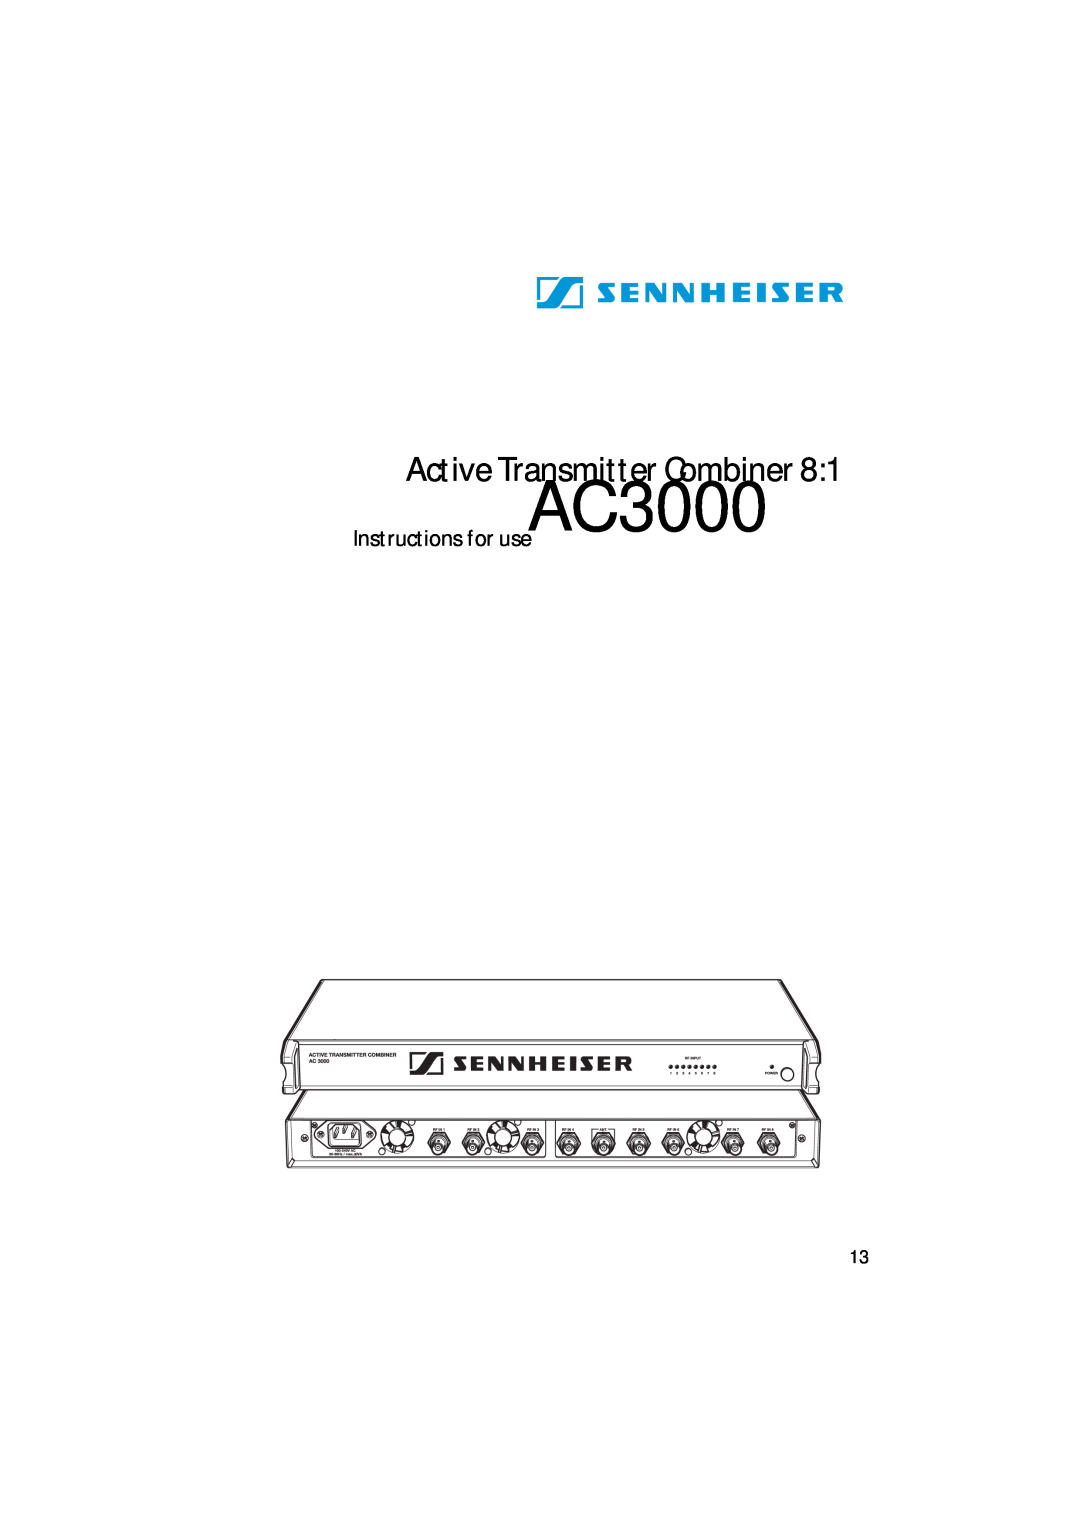 Sennheiser AC 3000 manual Instructions for useAC, Active Transmitter Combiner 